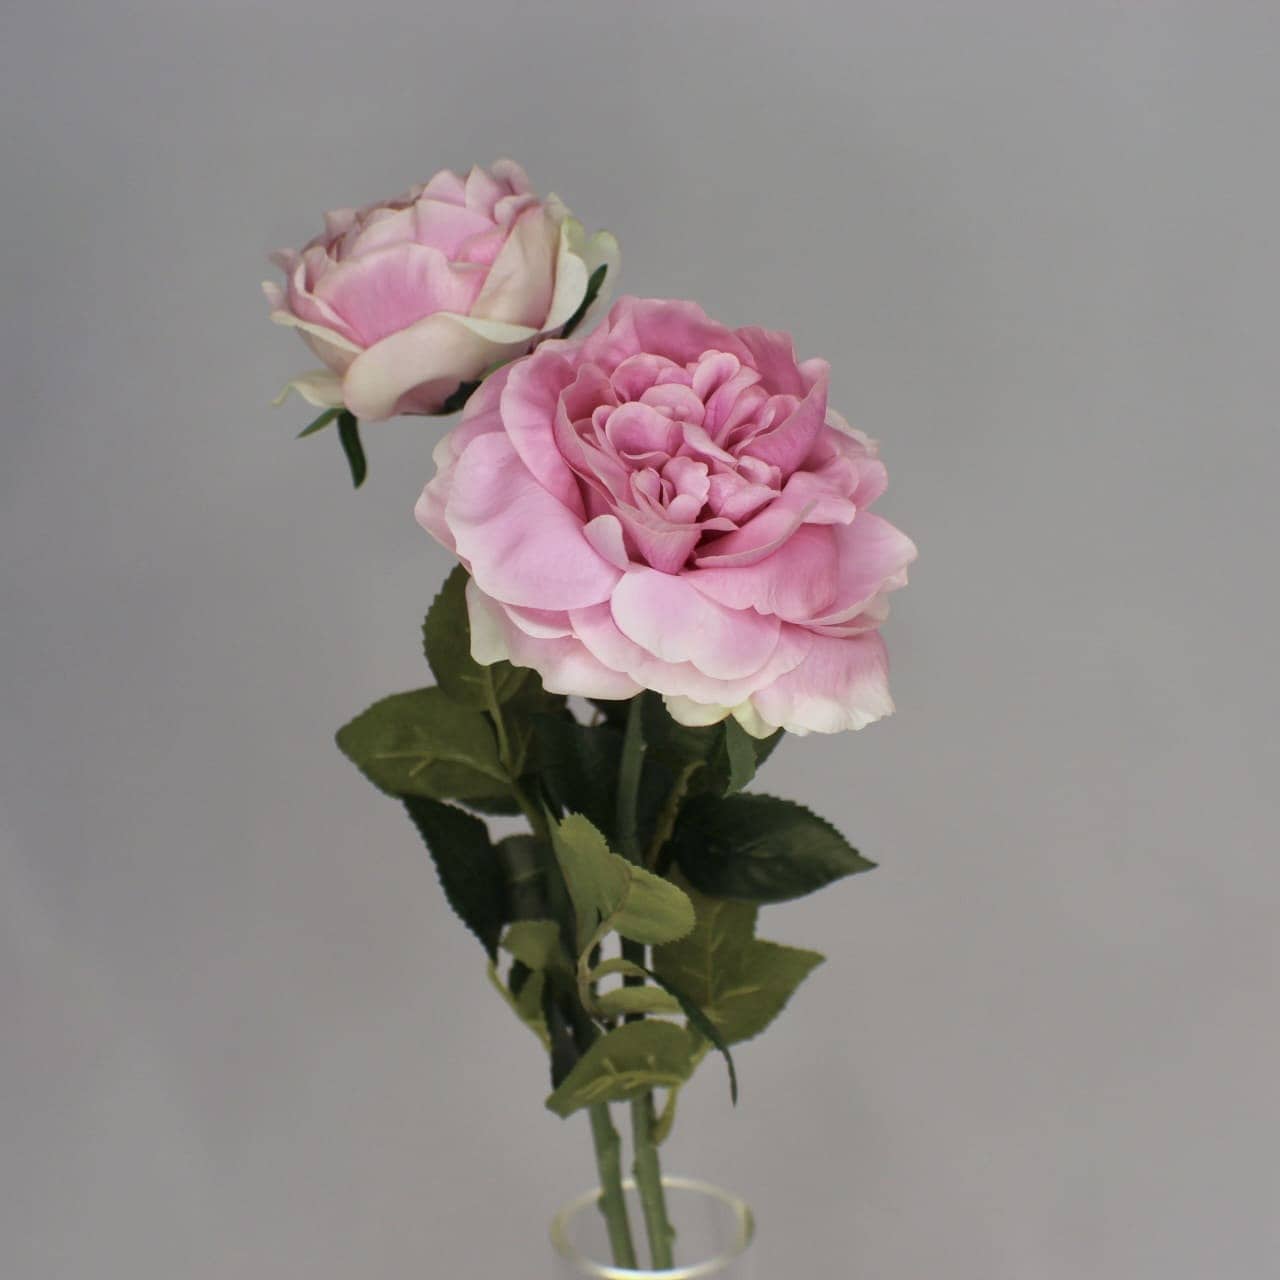 artificial half bloom pink ice roses placed in transparent glass vase